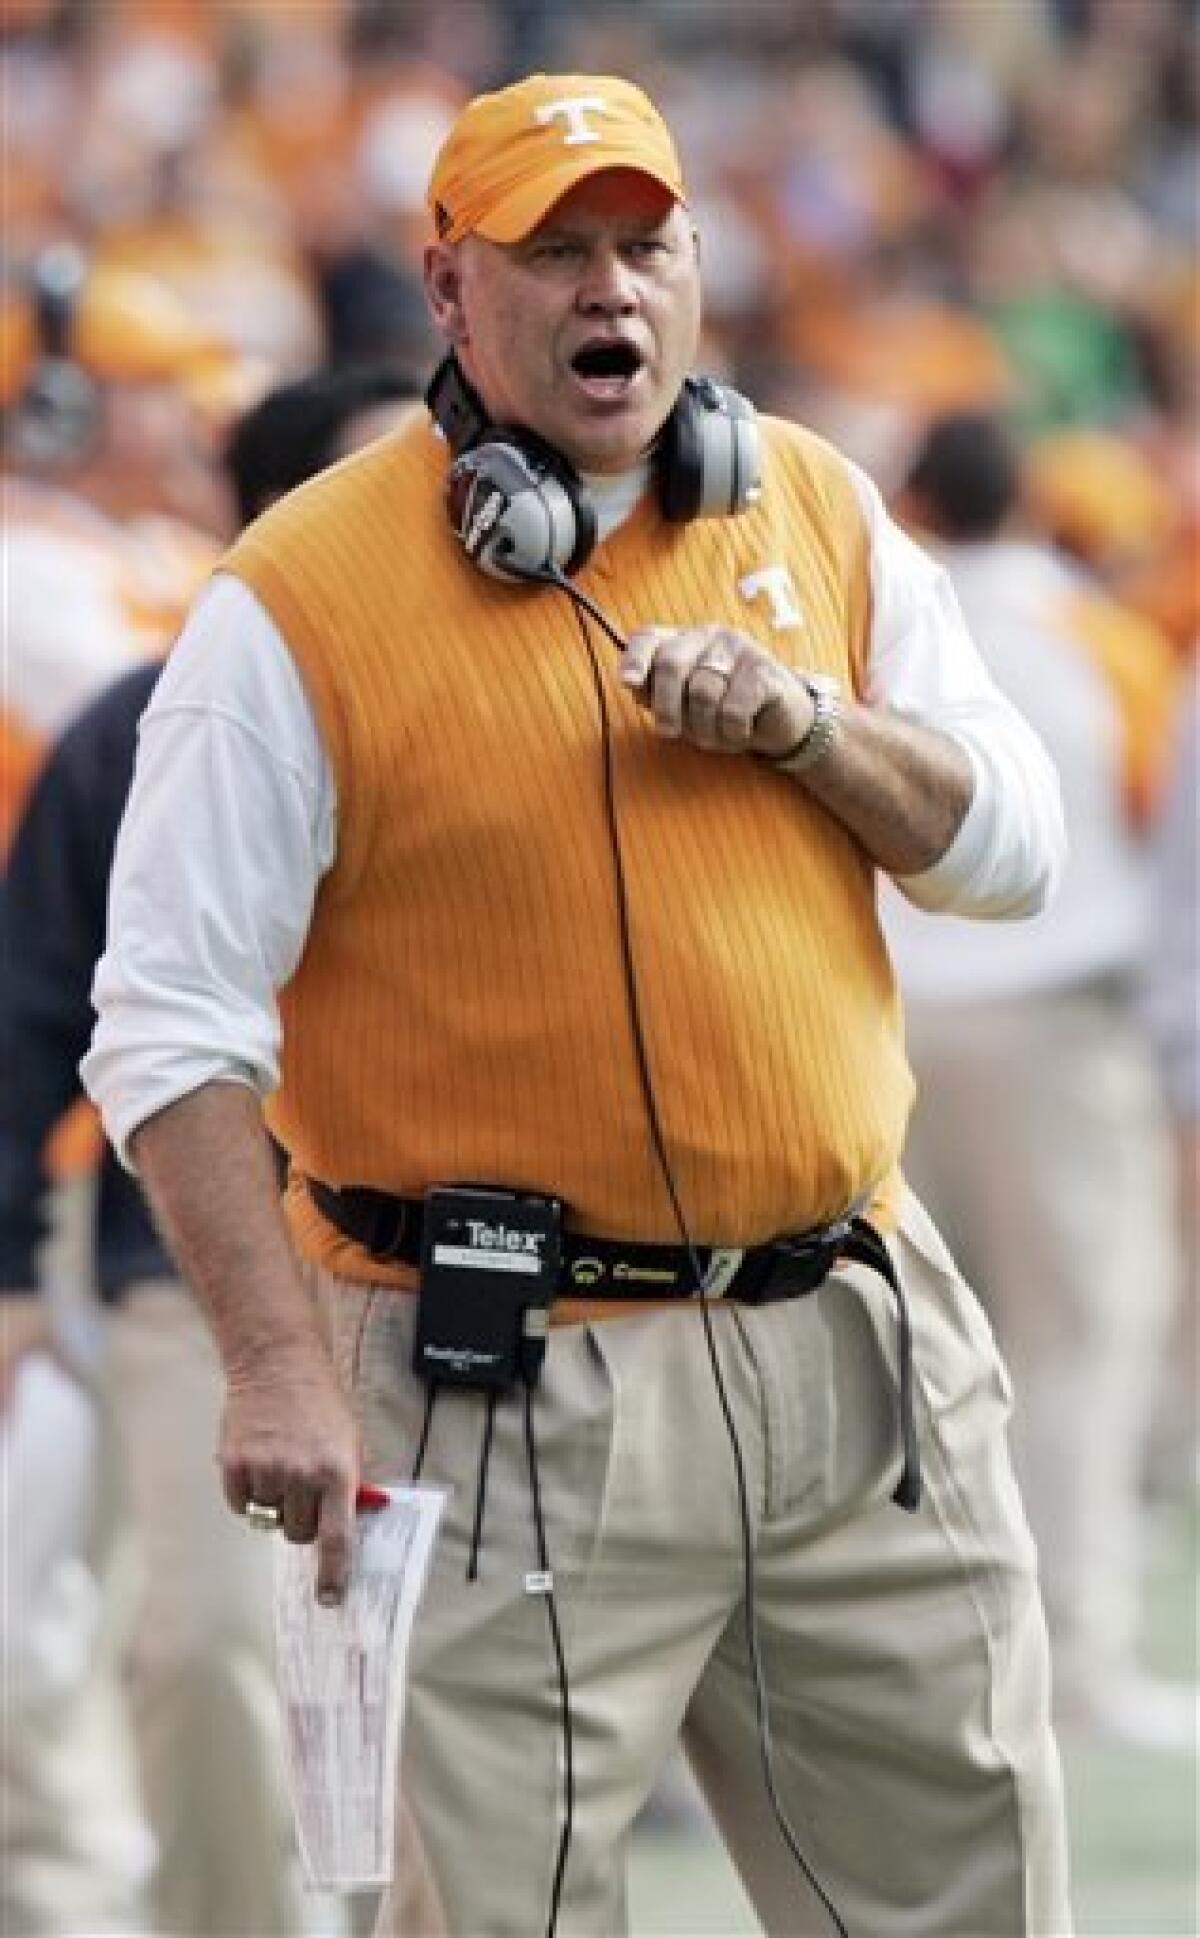 FILE - In this Nov. 8, 2008, file photo, Tennessee coach Phillip Fulmer yells to his team during the first half of an NCAA college football game against Wyoming in Knoxville, Tenn. The former Tennessee coach will serve as a consultant and special assistant to athletic director Richard Sander as East Tennessee State relaunches a football program it had shut down for financial reasons in 2003. (AP Photo/Wade Payne, File)